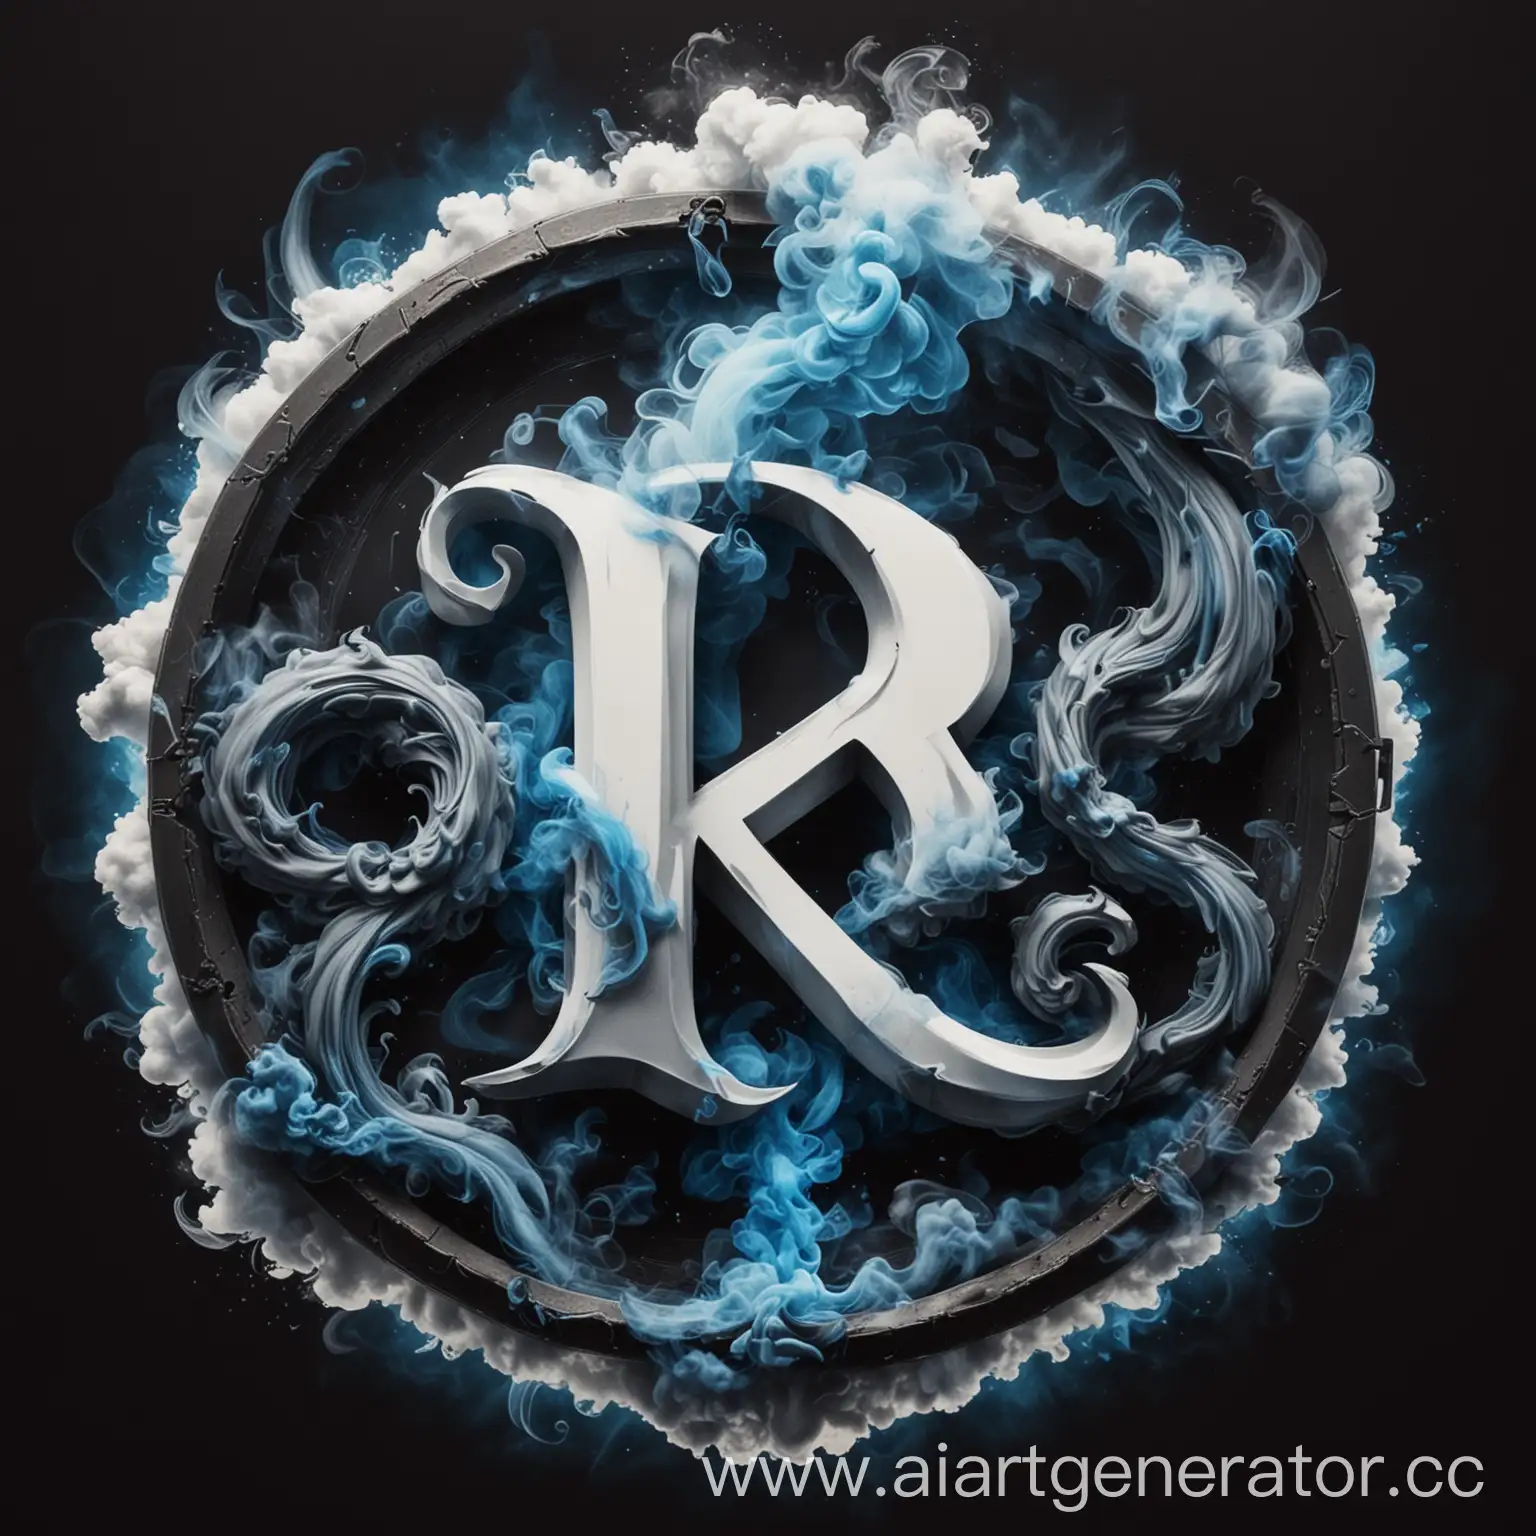 Reaper-Emblem-with-R-Letter-in-Dark-Blue-and-Black-Smoke